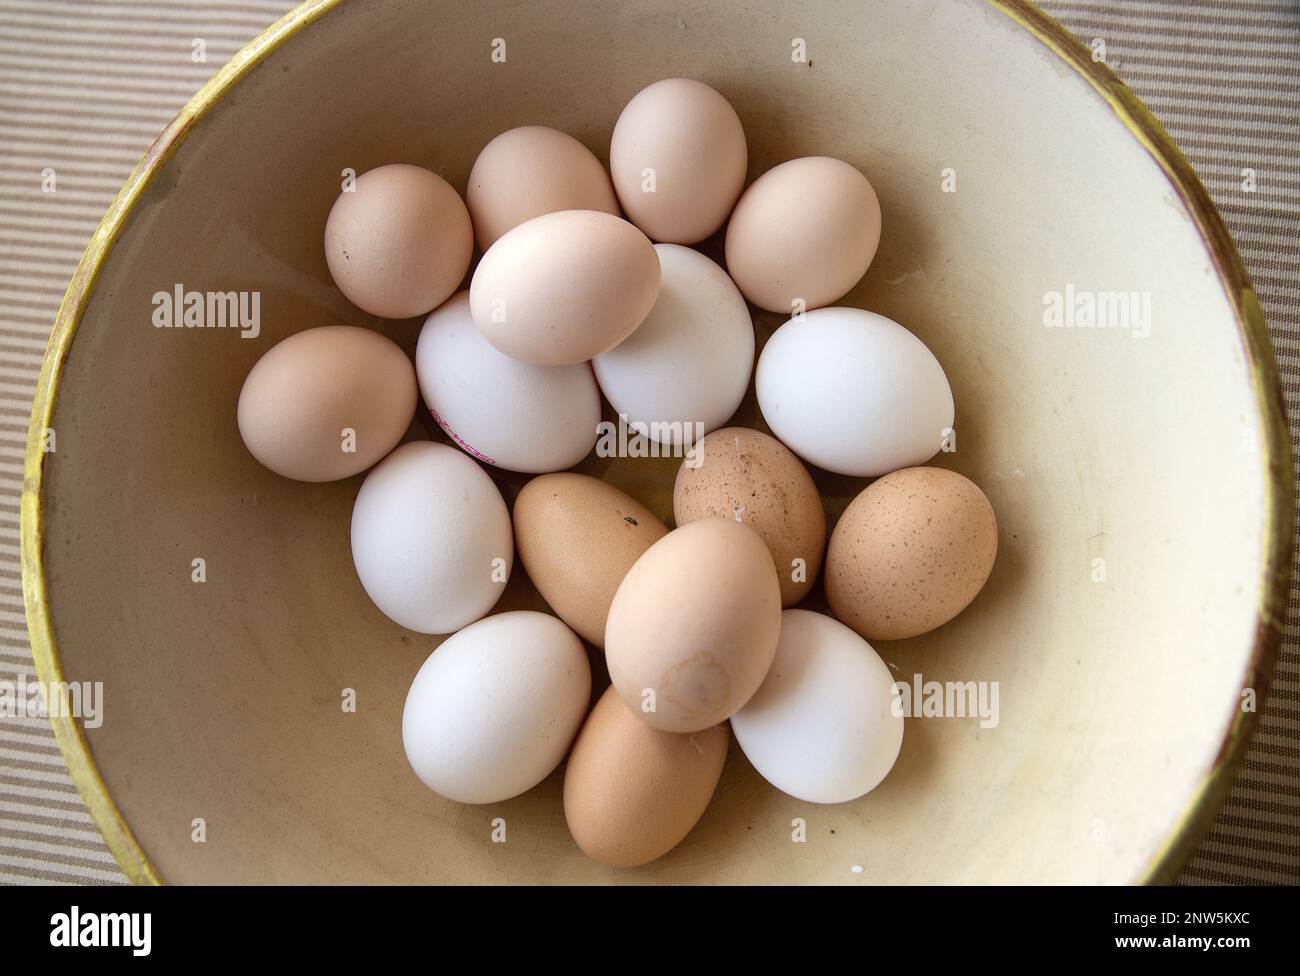 variety of different colored farm fresh eggs in a bowl Stock Photo